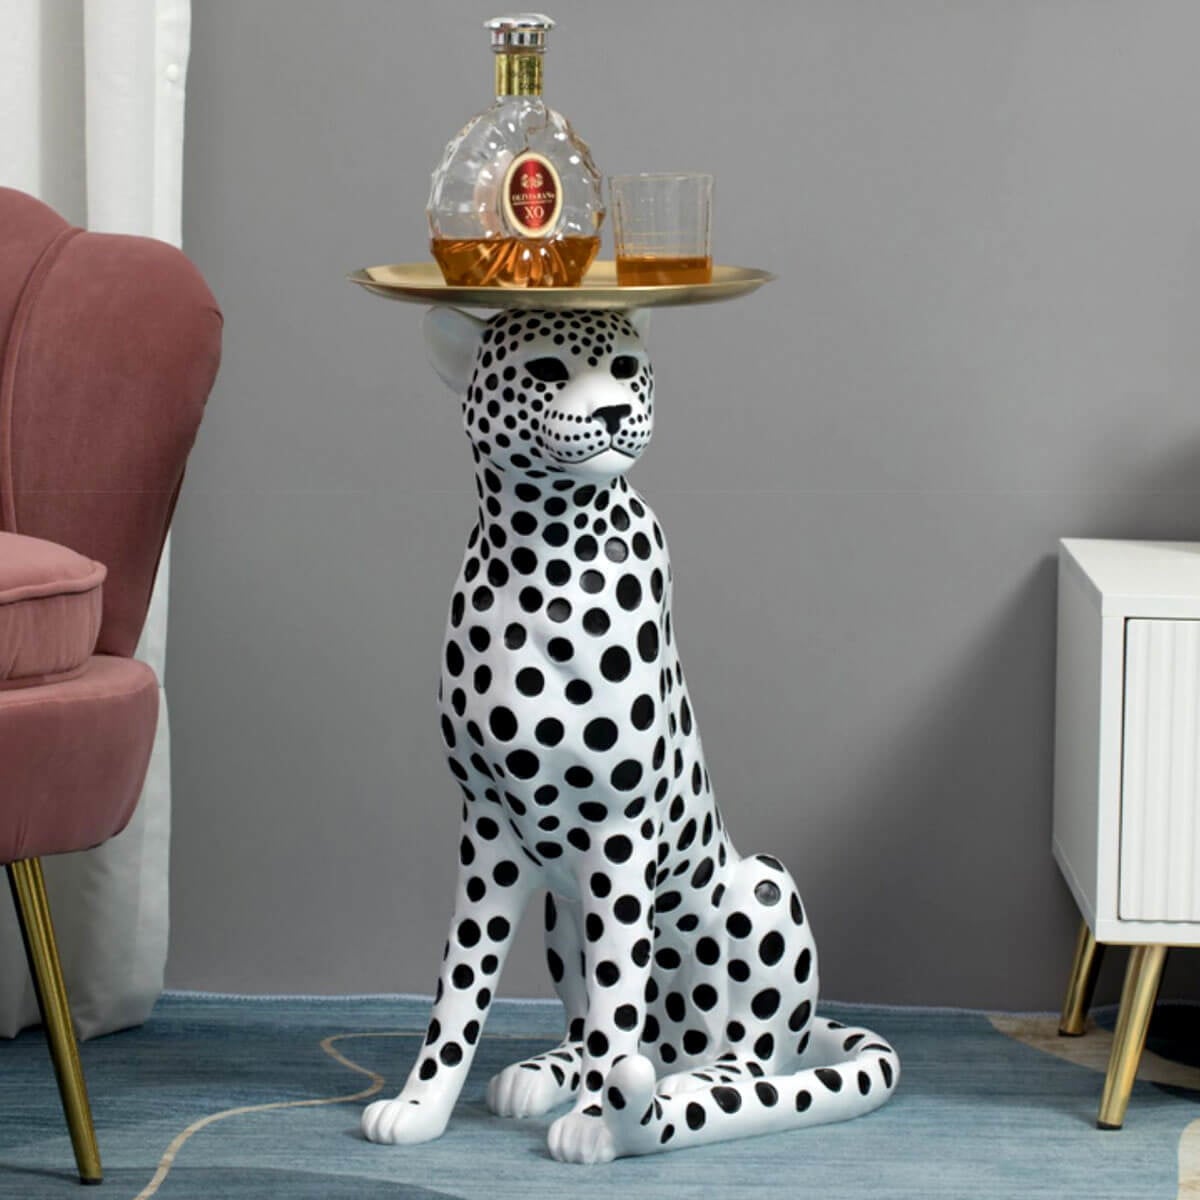 Animal Side Table - Large Leopard Sculpture for Home Decor